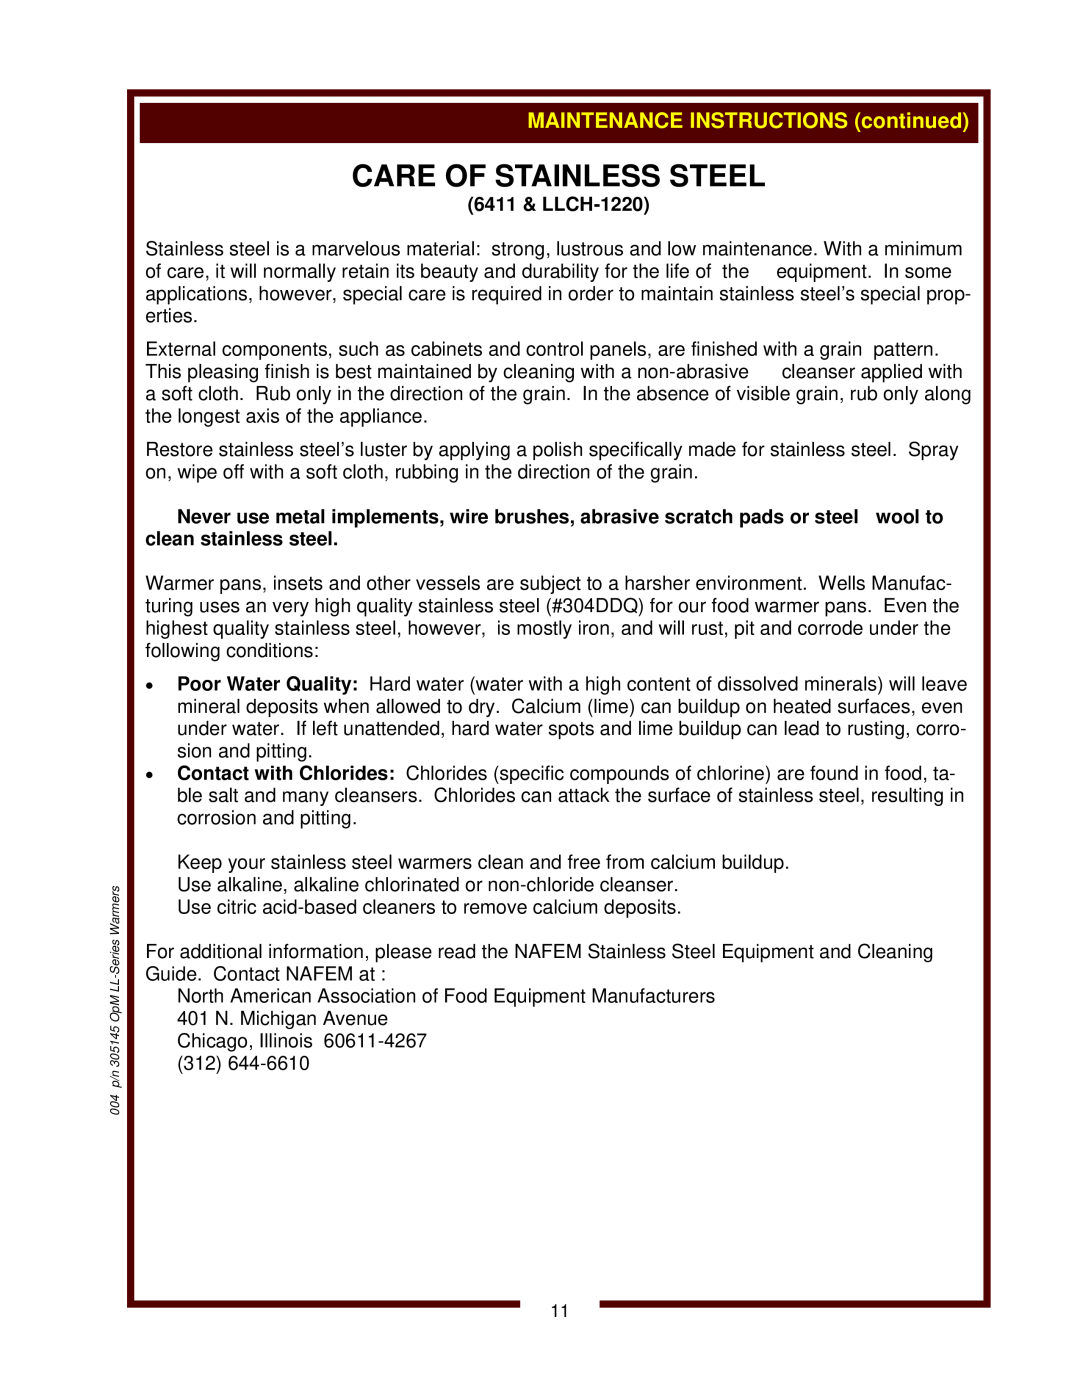 Wells SC-7, SC-1 operation manual Care Of Stainless Steel, 6411 & LLCH-1220 